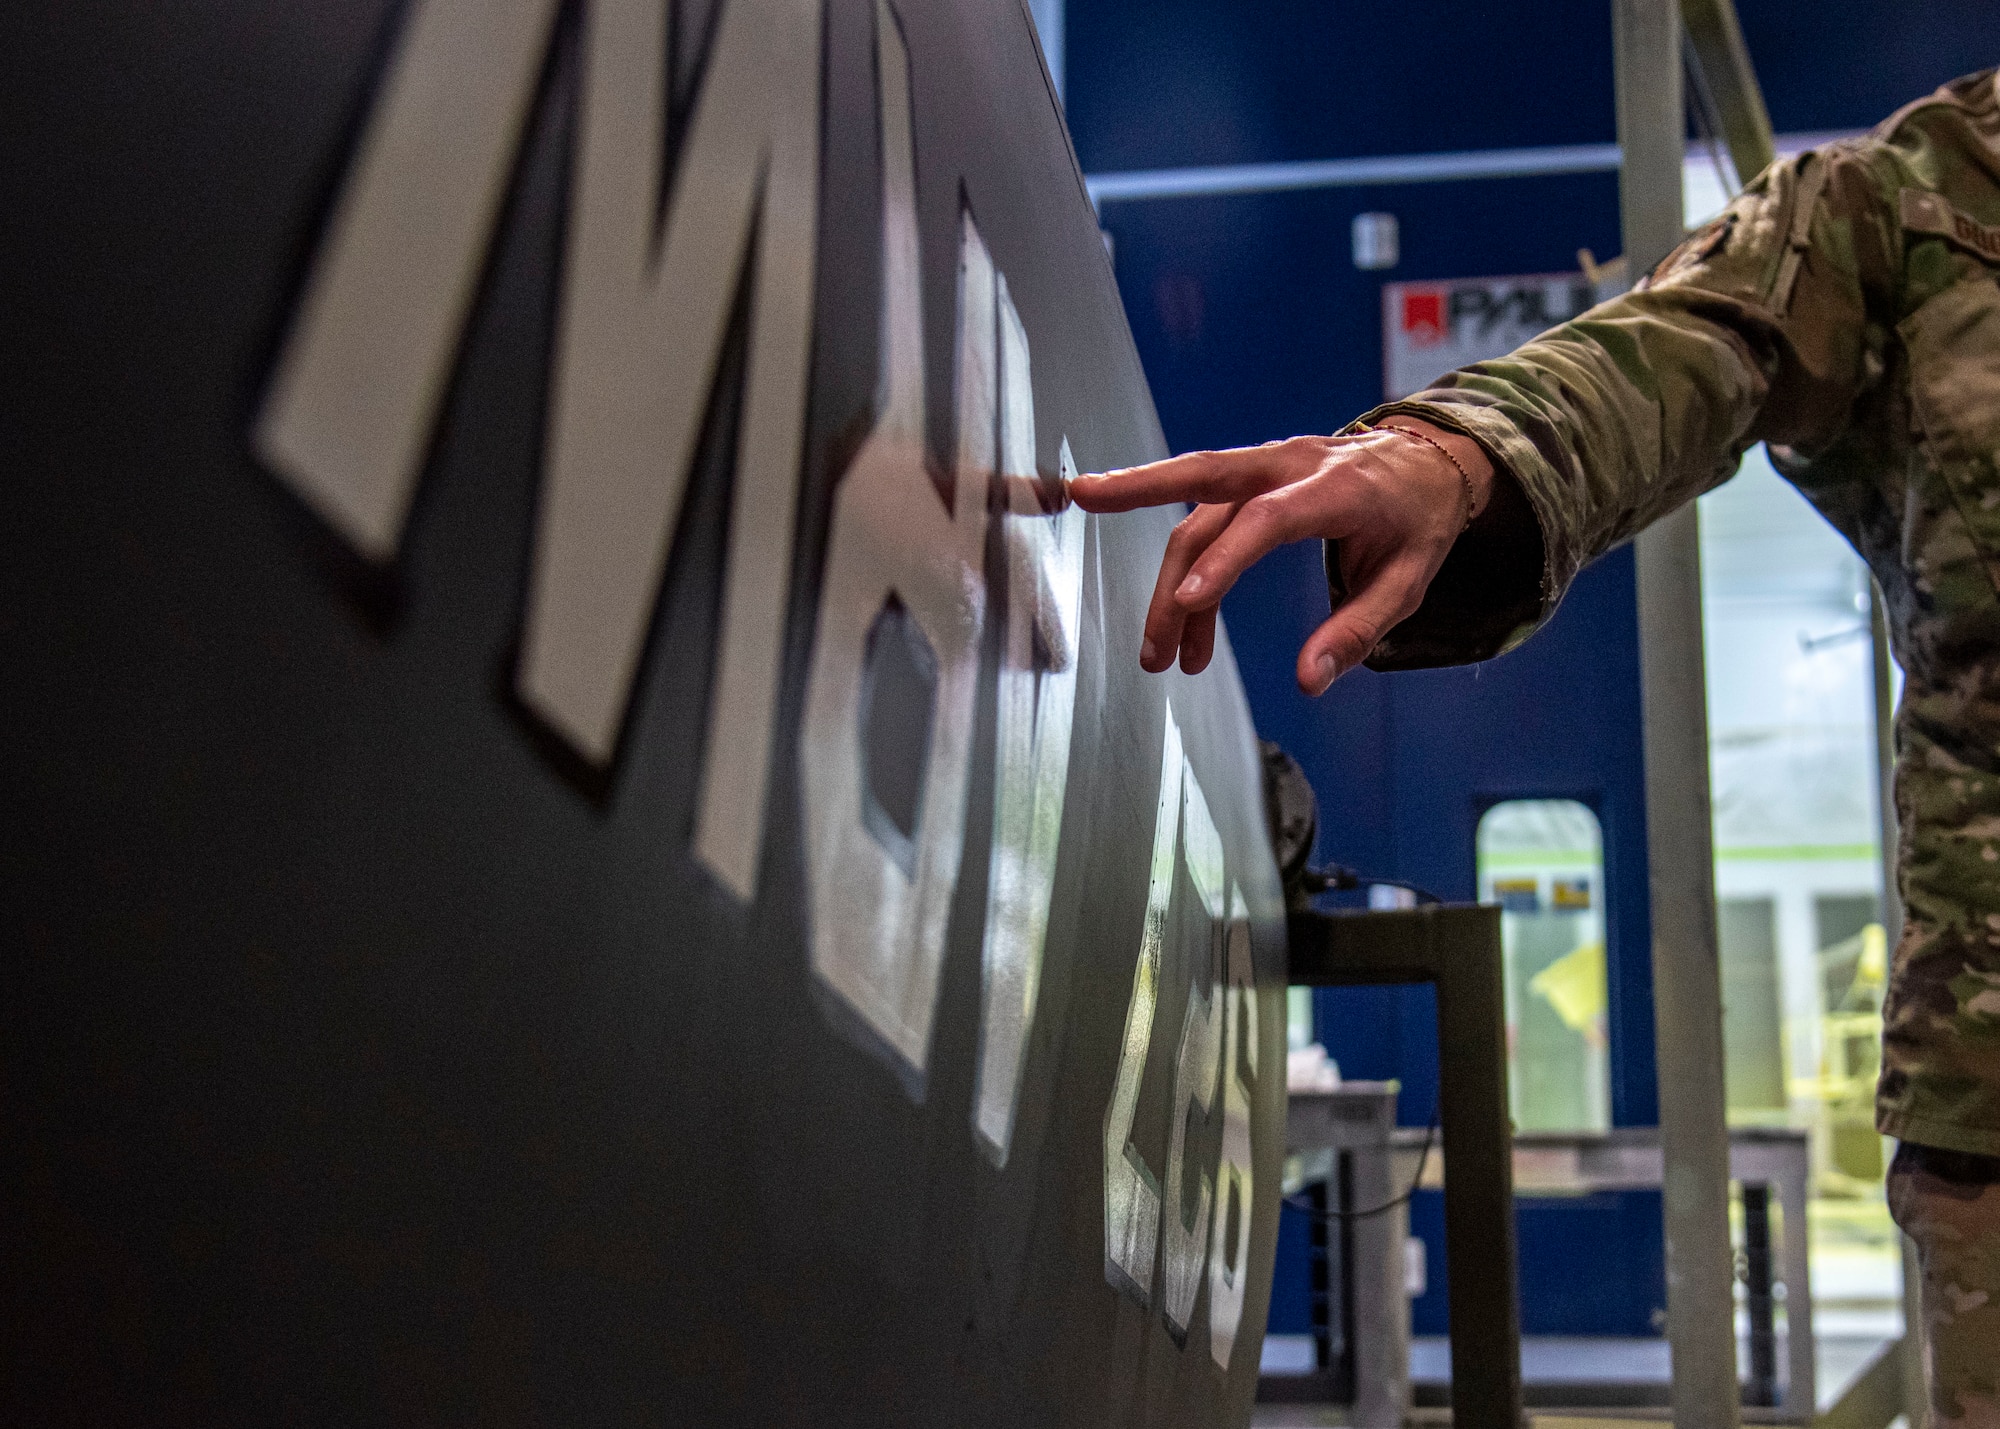 U.S. Air Force Tech. Sgt. Kurtis Geiger, noncommissioned officer in charge of the 6th Maintenance Squadron corrosion control unit, points to a vinyl decal in the corrosion control facility at MacDill Air Force Base, Florida, April 12, 2022.